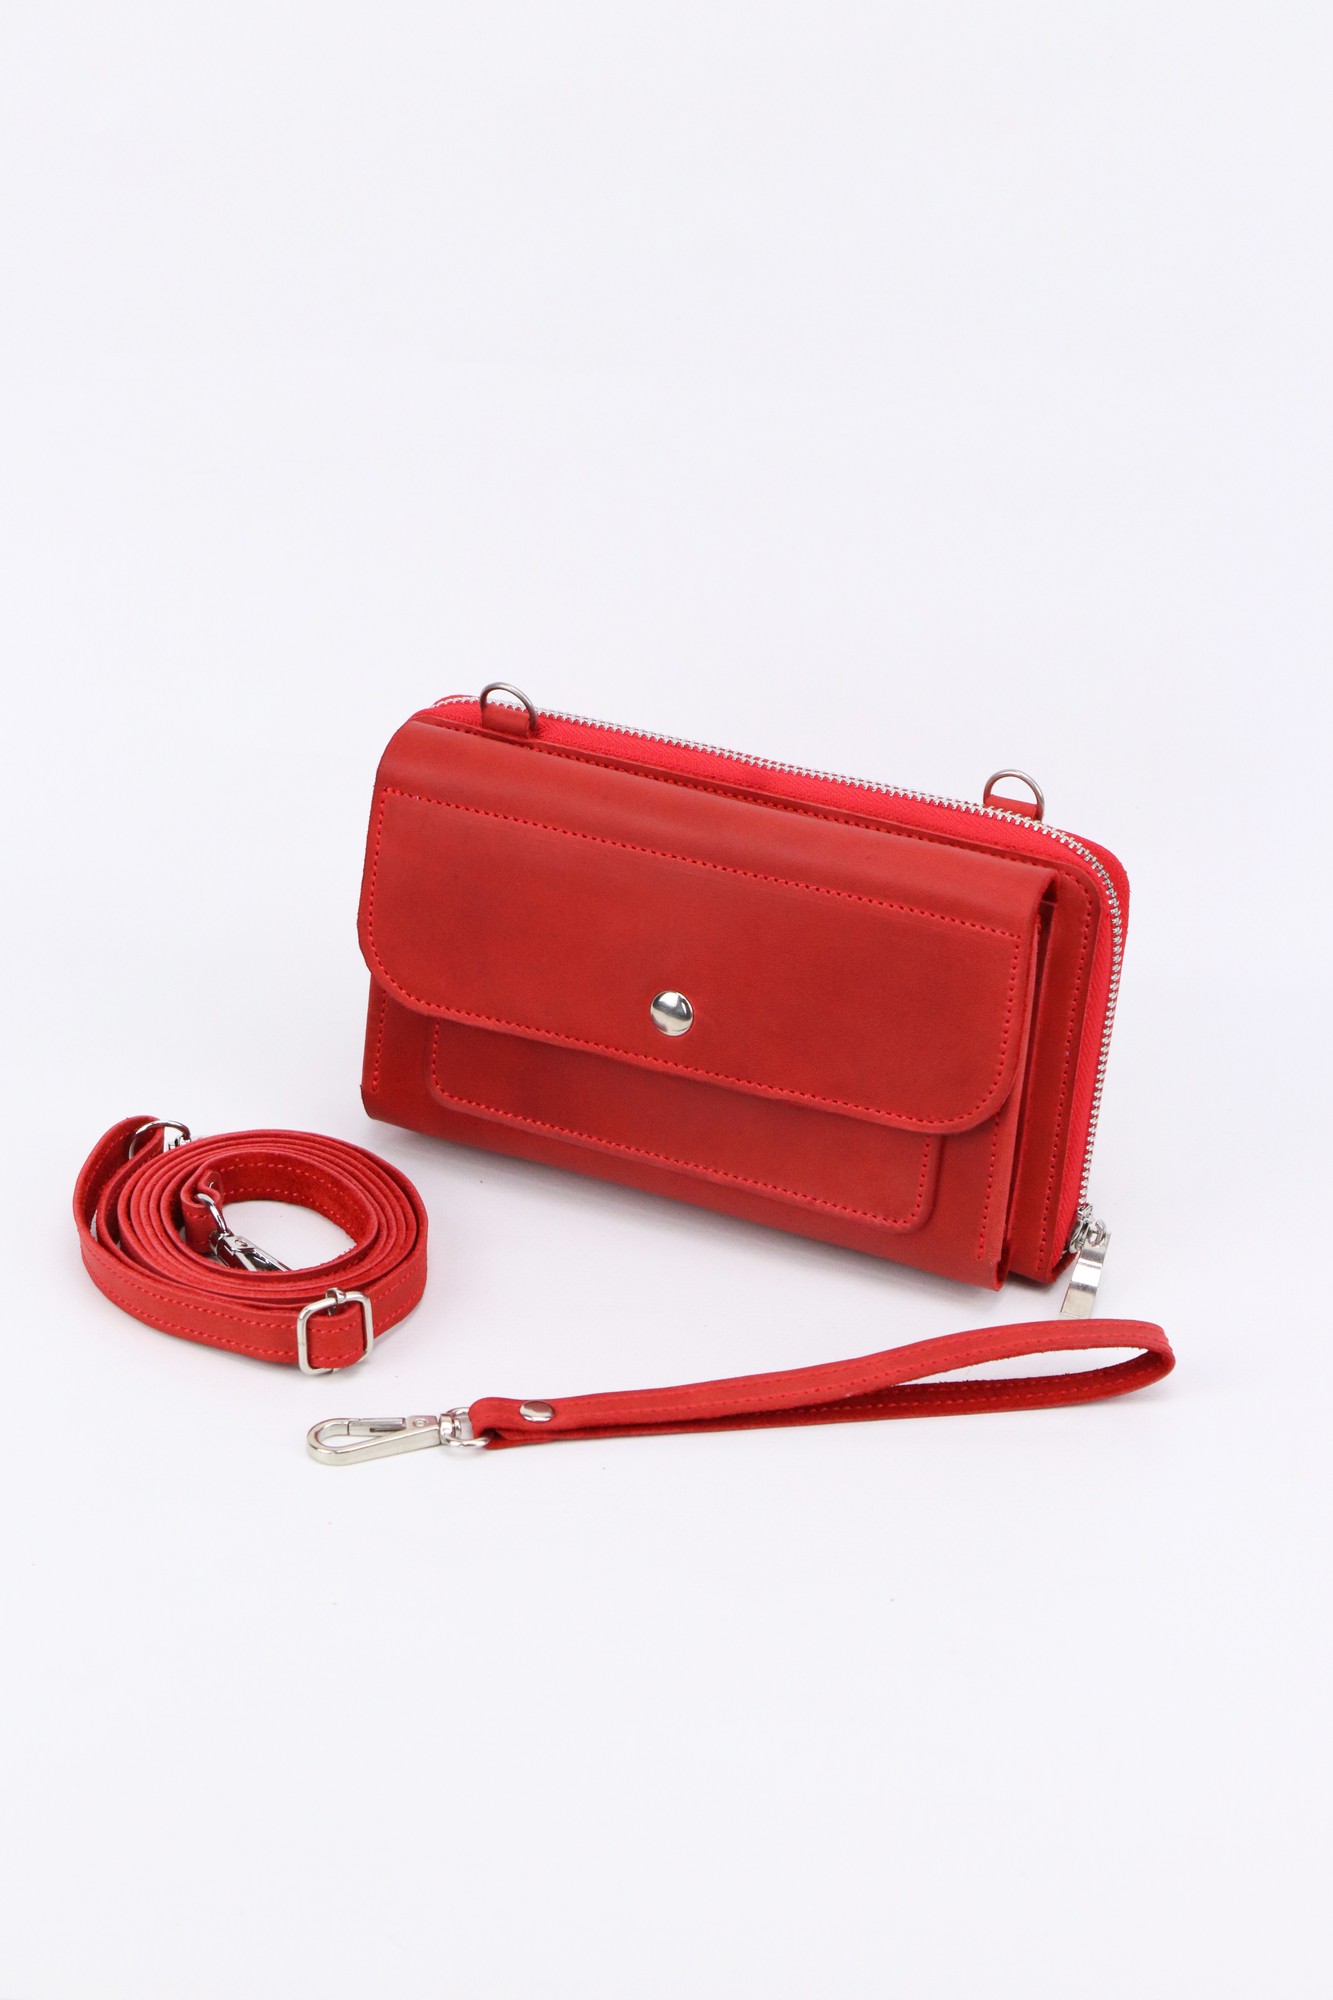 Leather Smartphone Crossbody Small Bag for Women/ Purse for iPhone 14 Pro with Wrist Strap/ Red/ 1011. Made in Ukraine